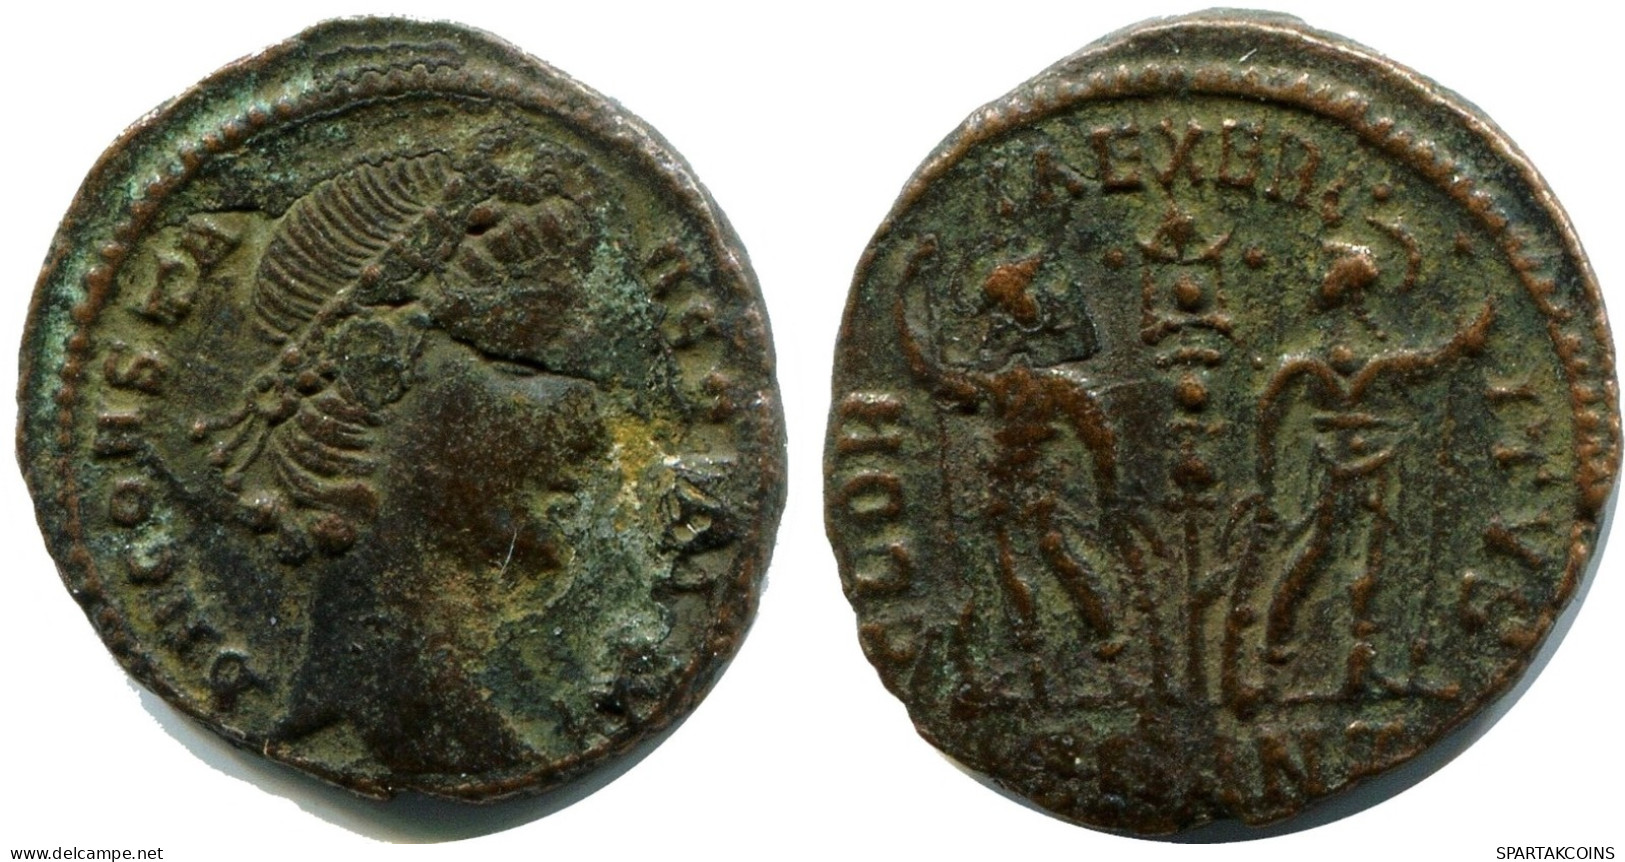 CONSTANS MINTED IN ANTIOCH FROM THE ROYAL ONTARIO MUSEUM #ANC11800.14.F.A - The Christian Empire (307 AD To 363 AD)